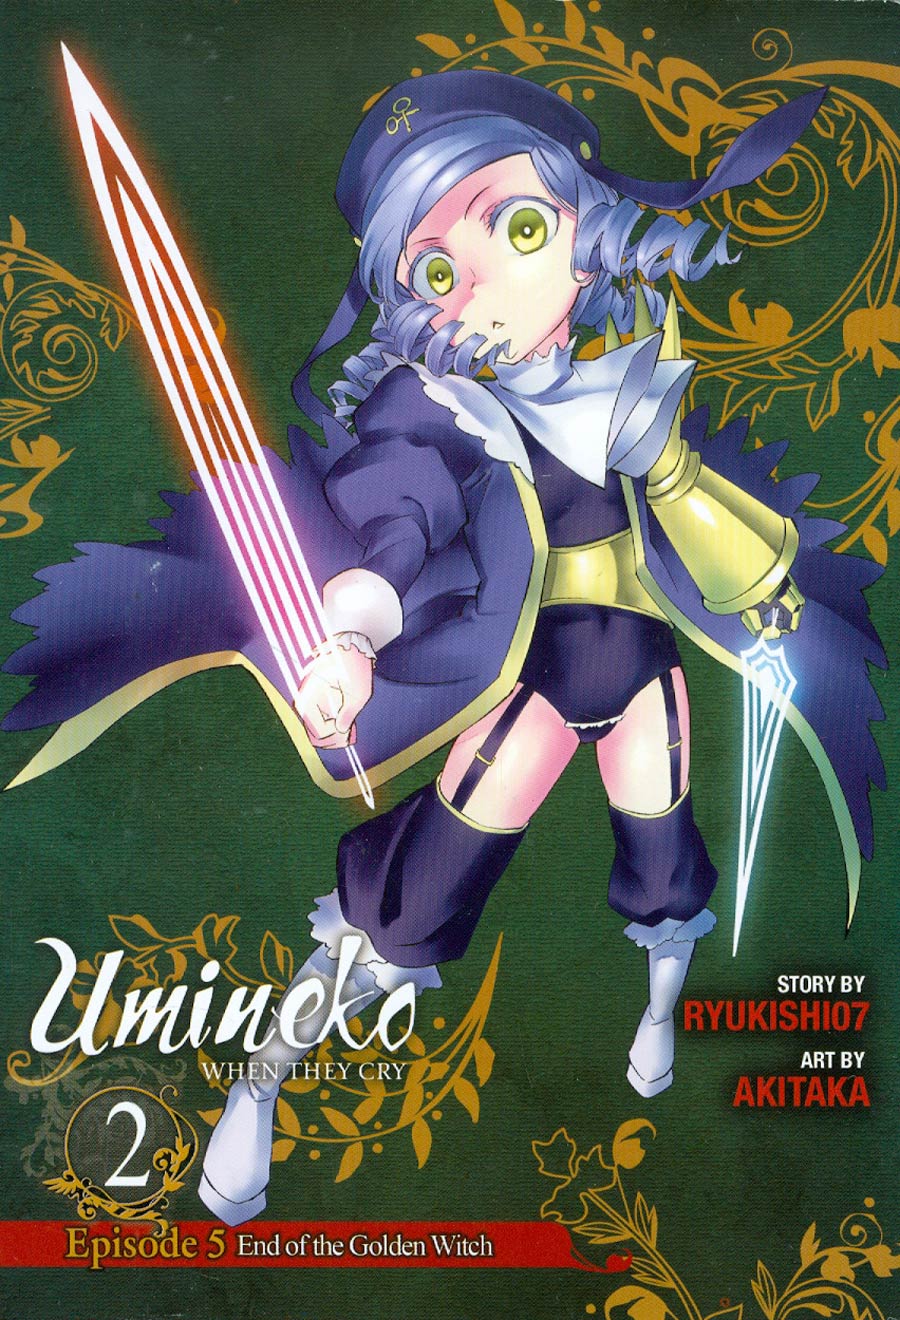 Umineko When They Cry Vol 11 Episode 5 End Of The Golden Witch Part 2 GN